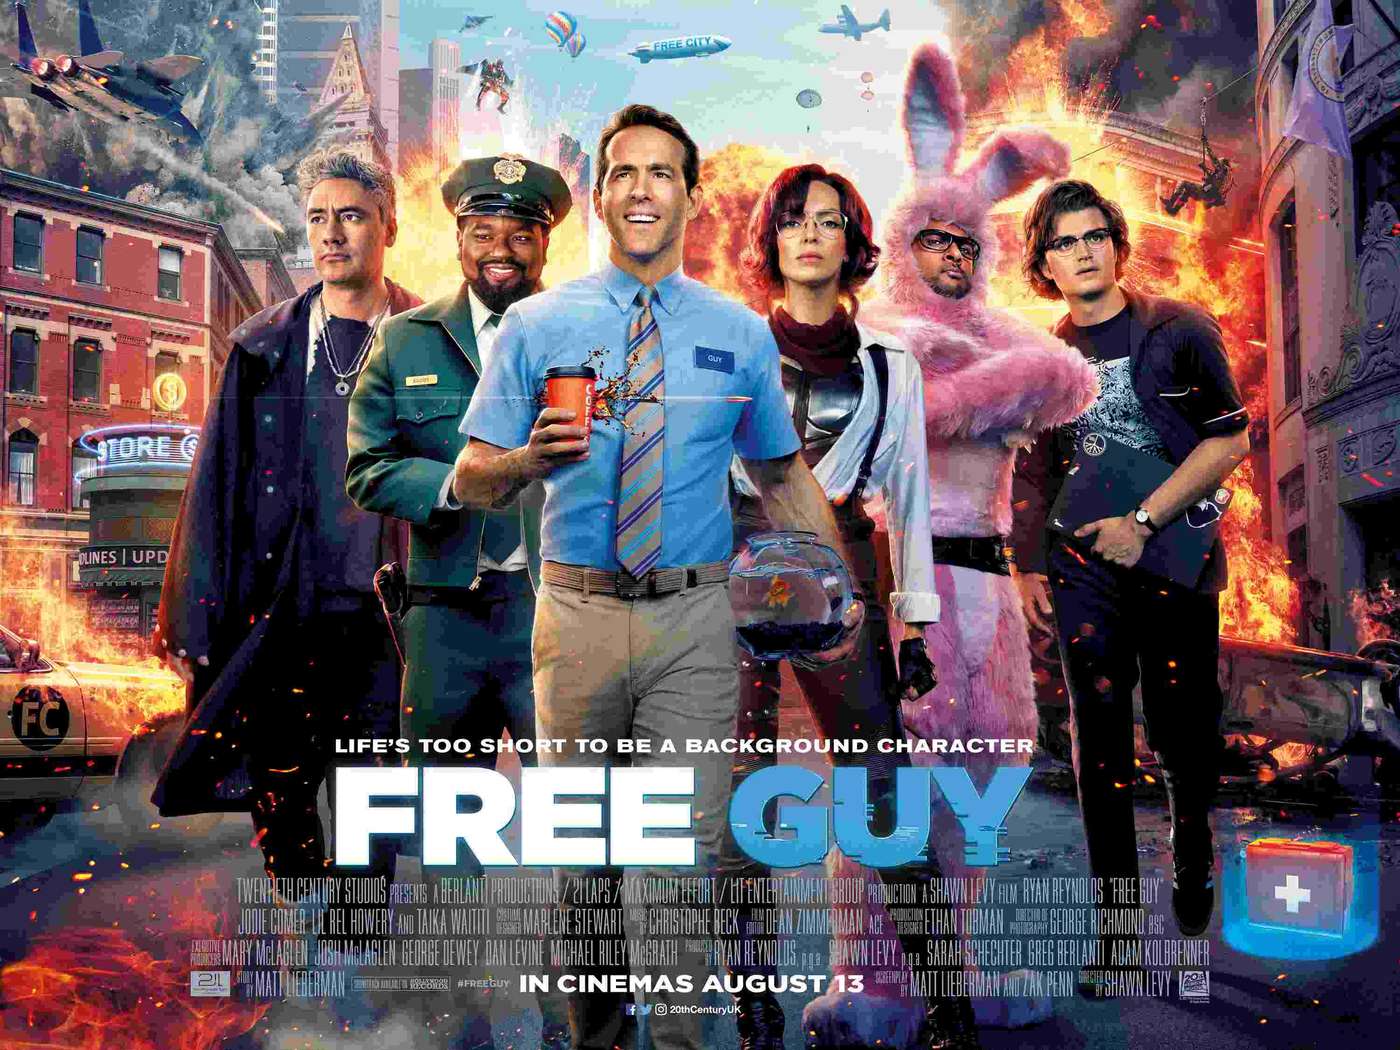 Free guy review